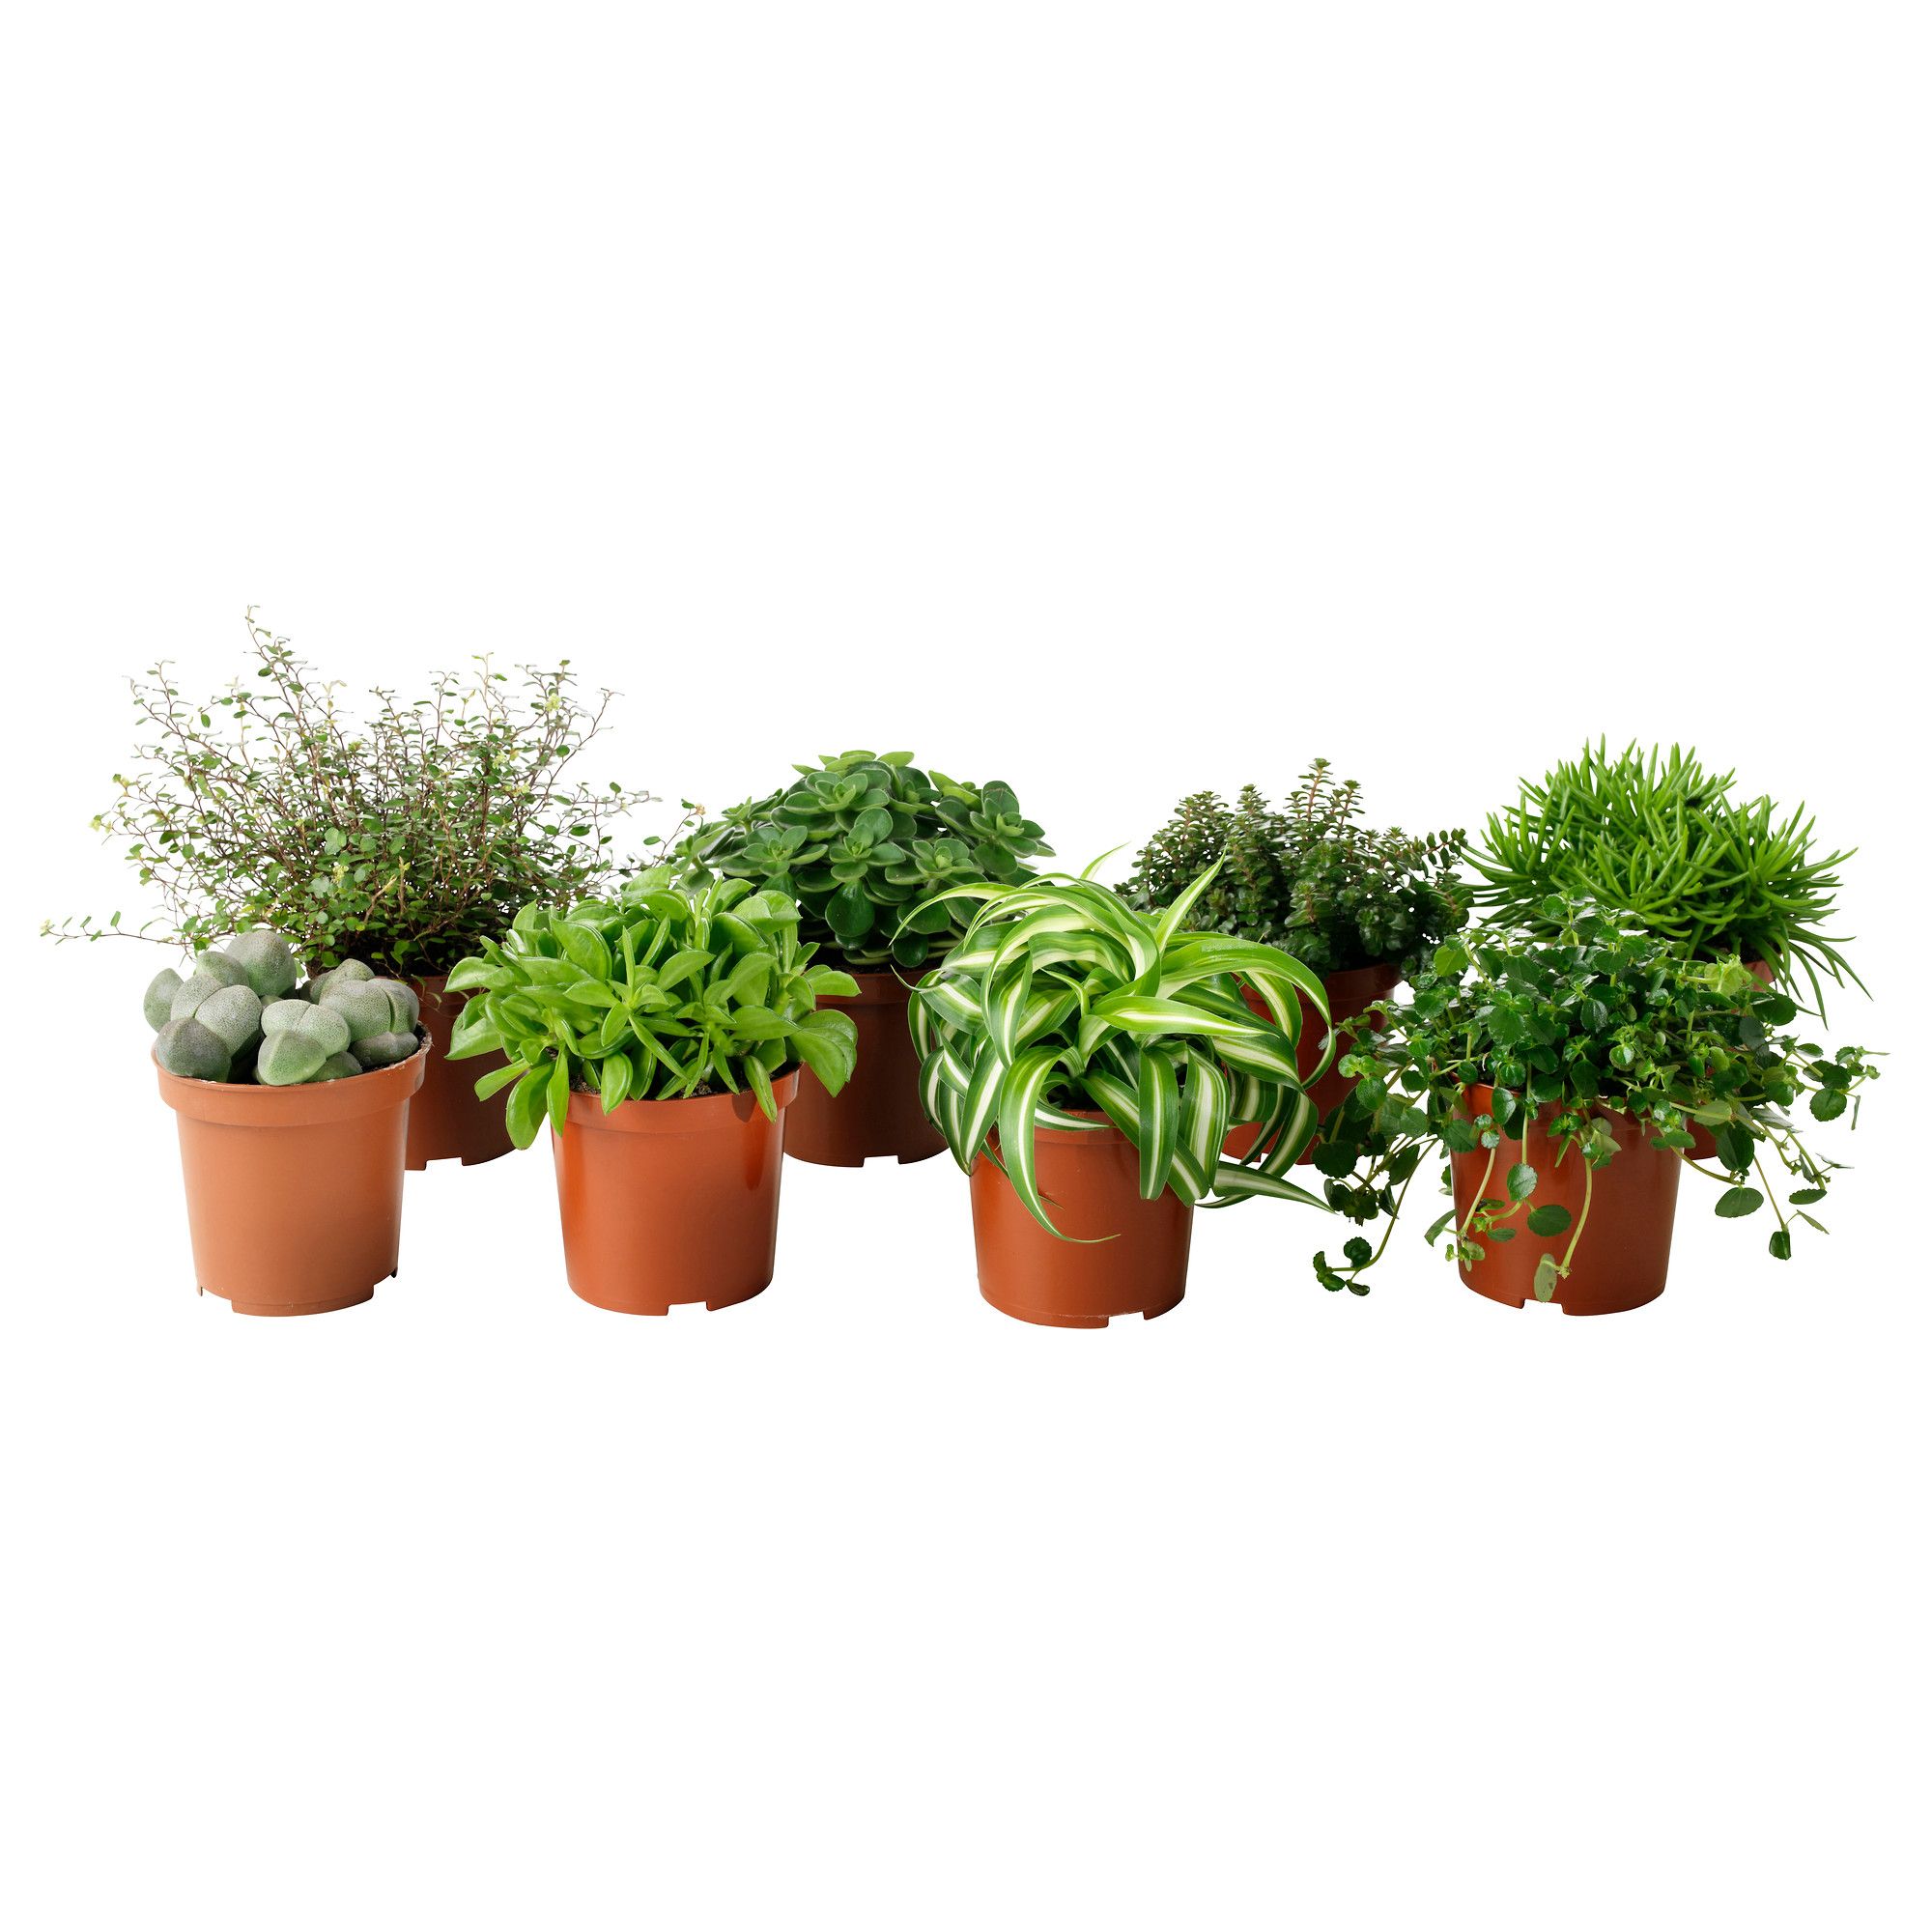 HIMALAYAMIX Potted plant, assorted species plants | Apartments ...